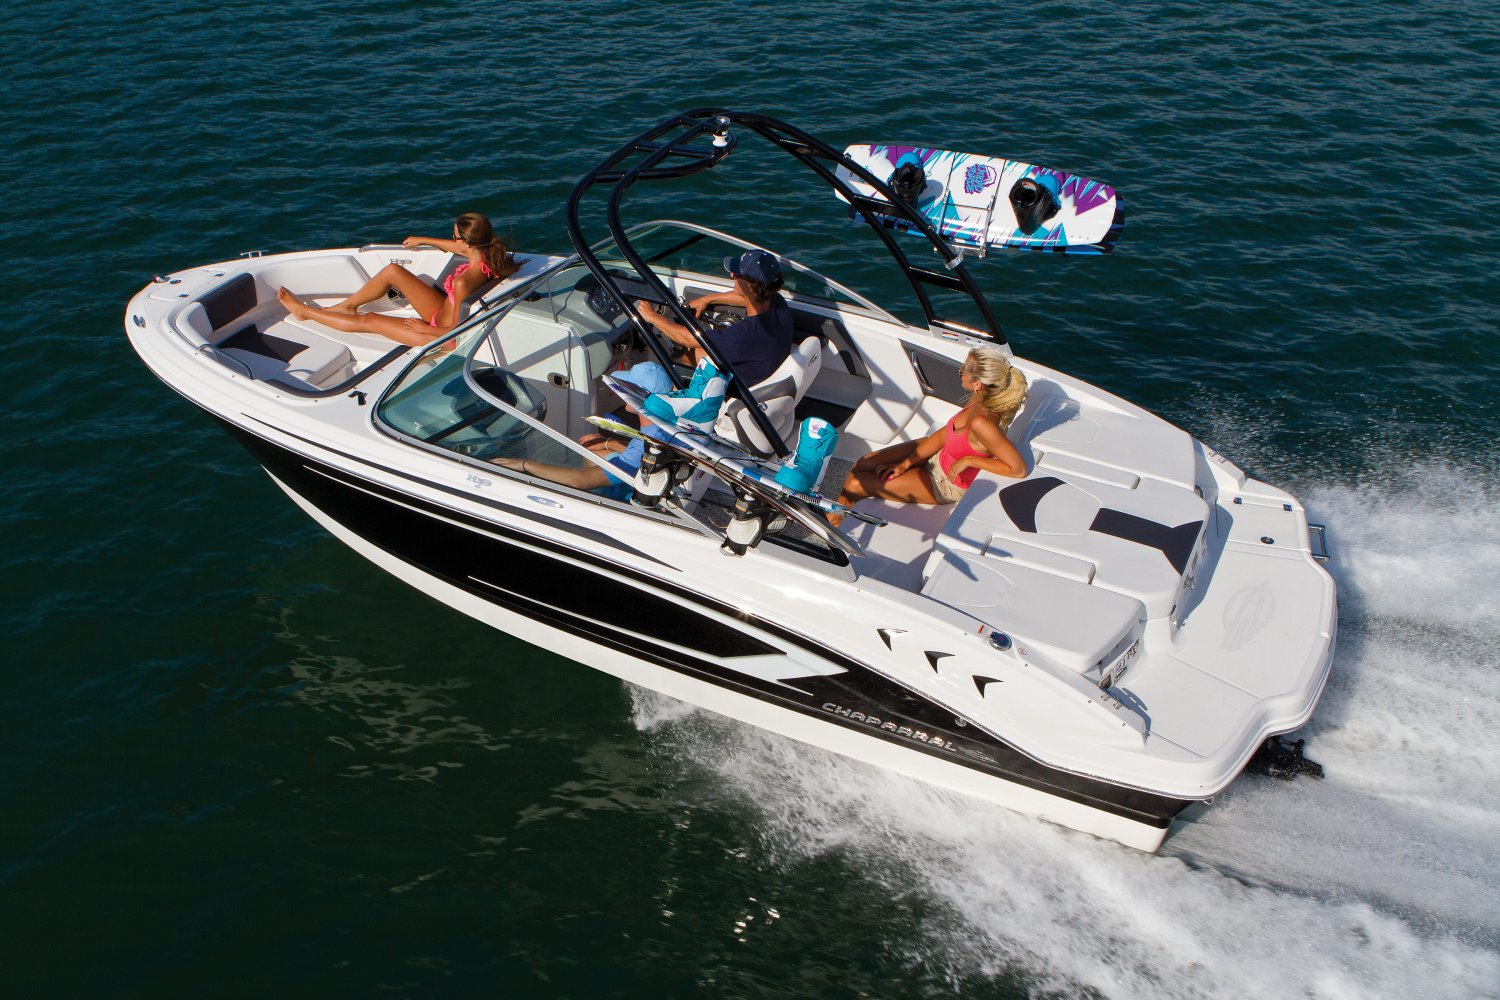 Bowriders The Perfect Family Boat Bowriders Buyers Guide